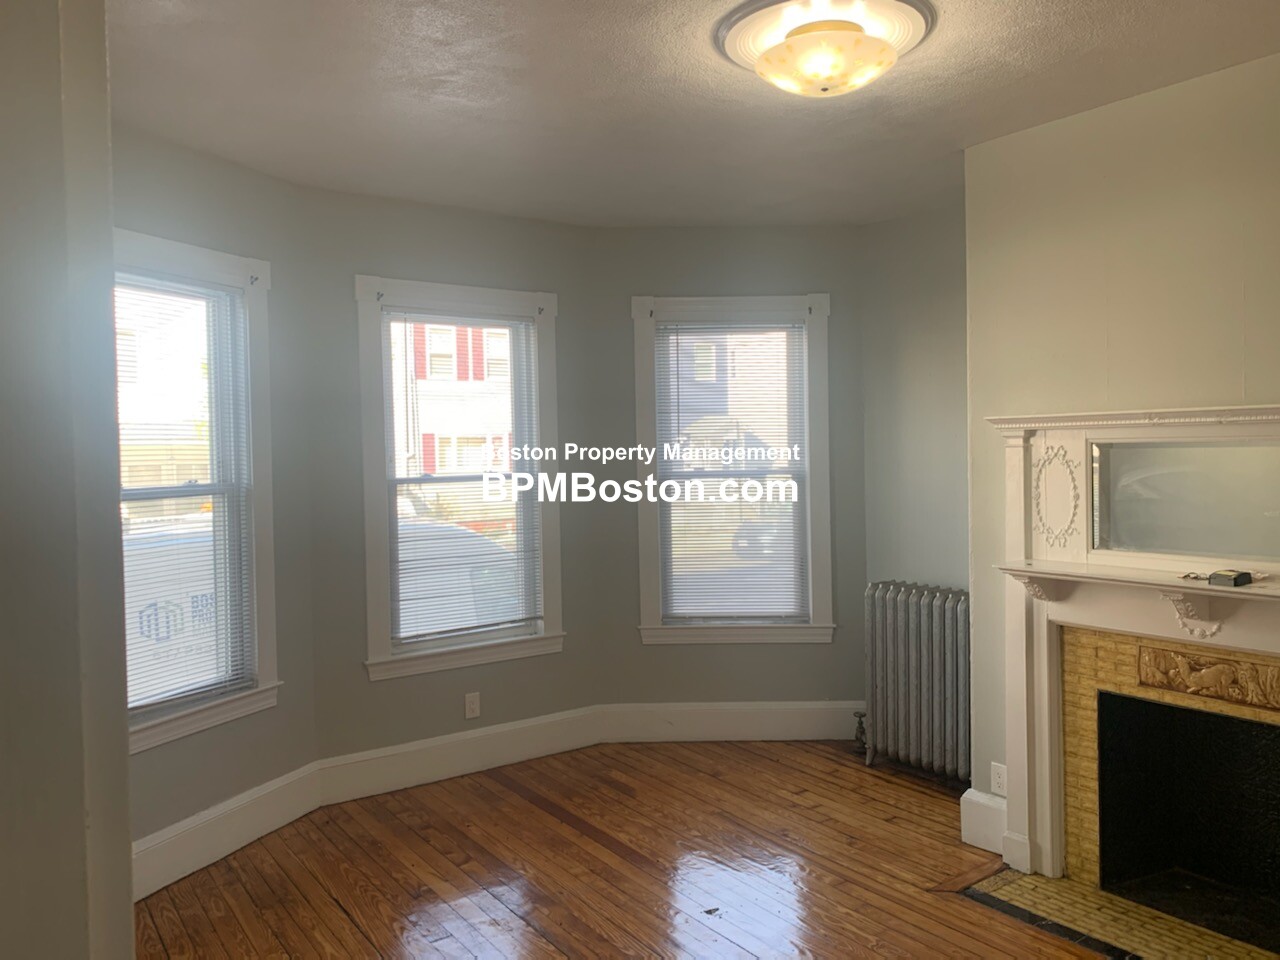 Photos of apartment on Louis St.,Chelsea MA 02150